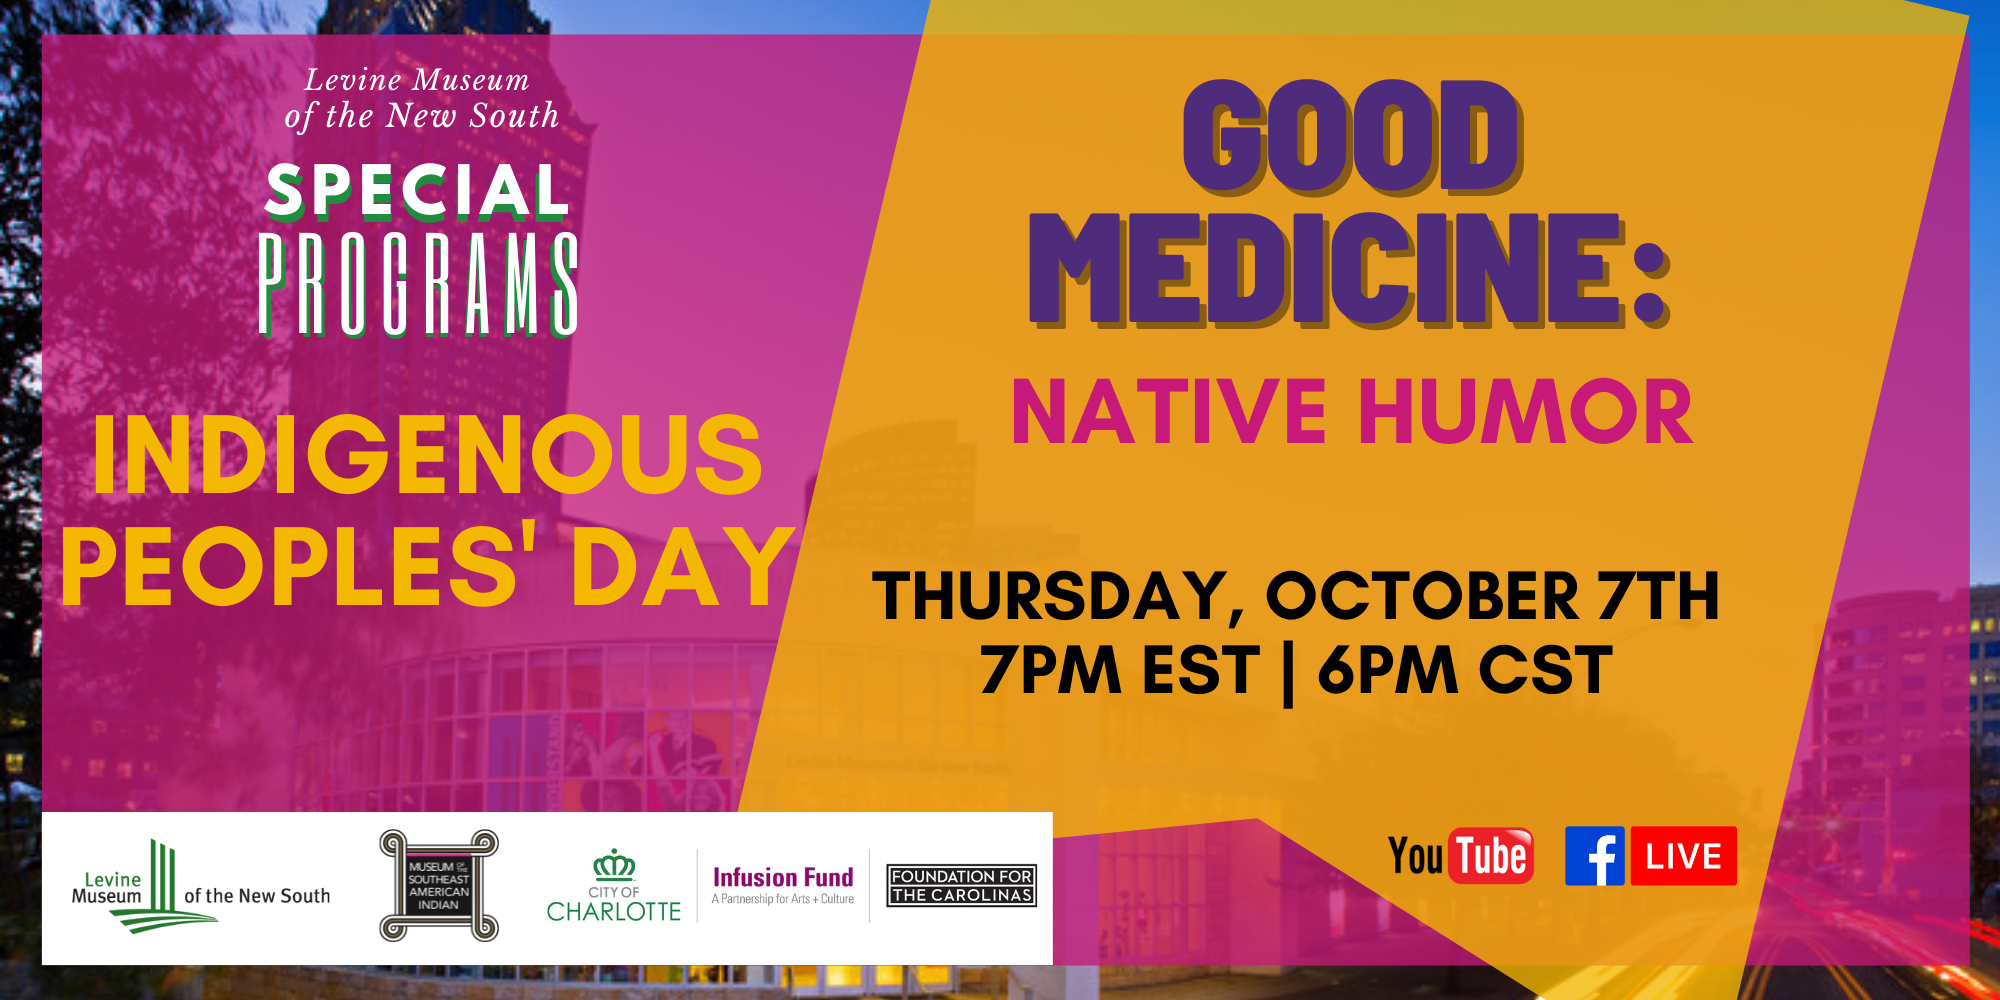 Levine Museum of the New South Indigenous People's Day Good Medicine: Native Humor Event Image